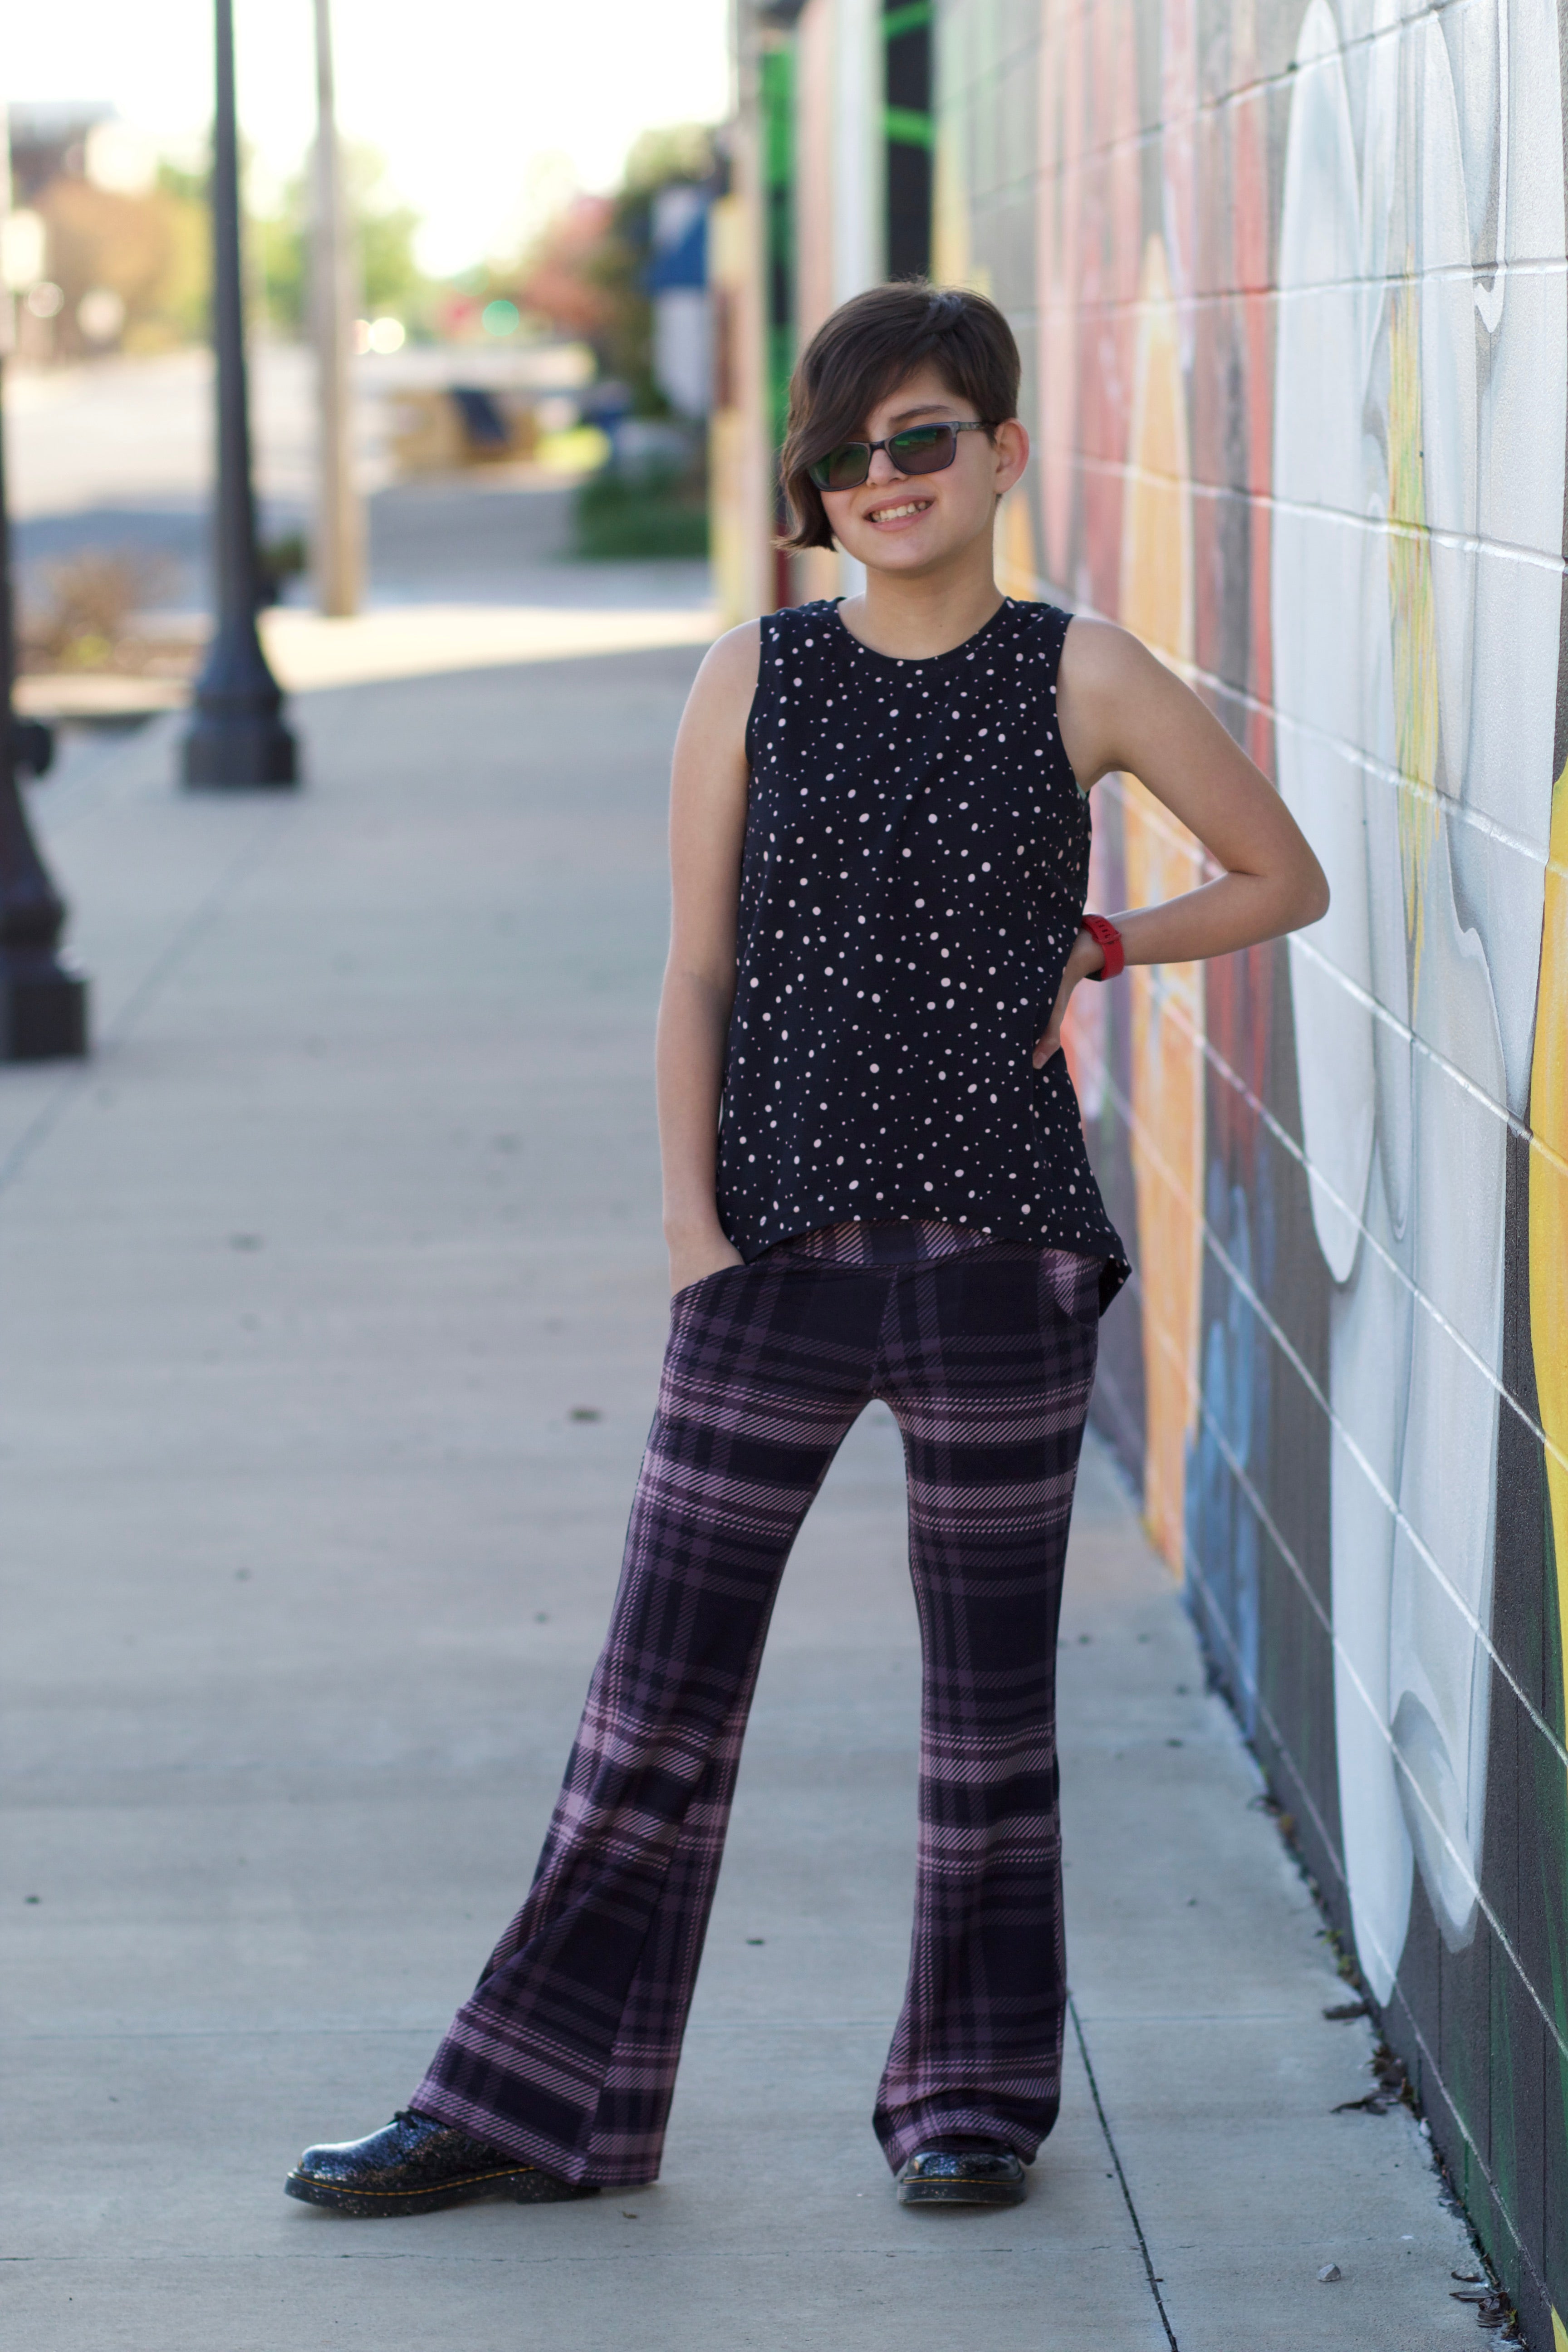 Grey flare leggings <3  Flare leggings, Flares outfit, Flared pants outfit